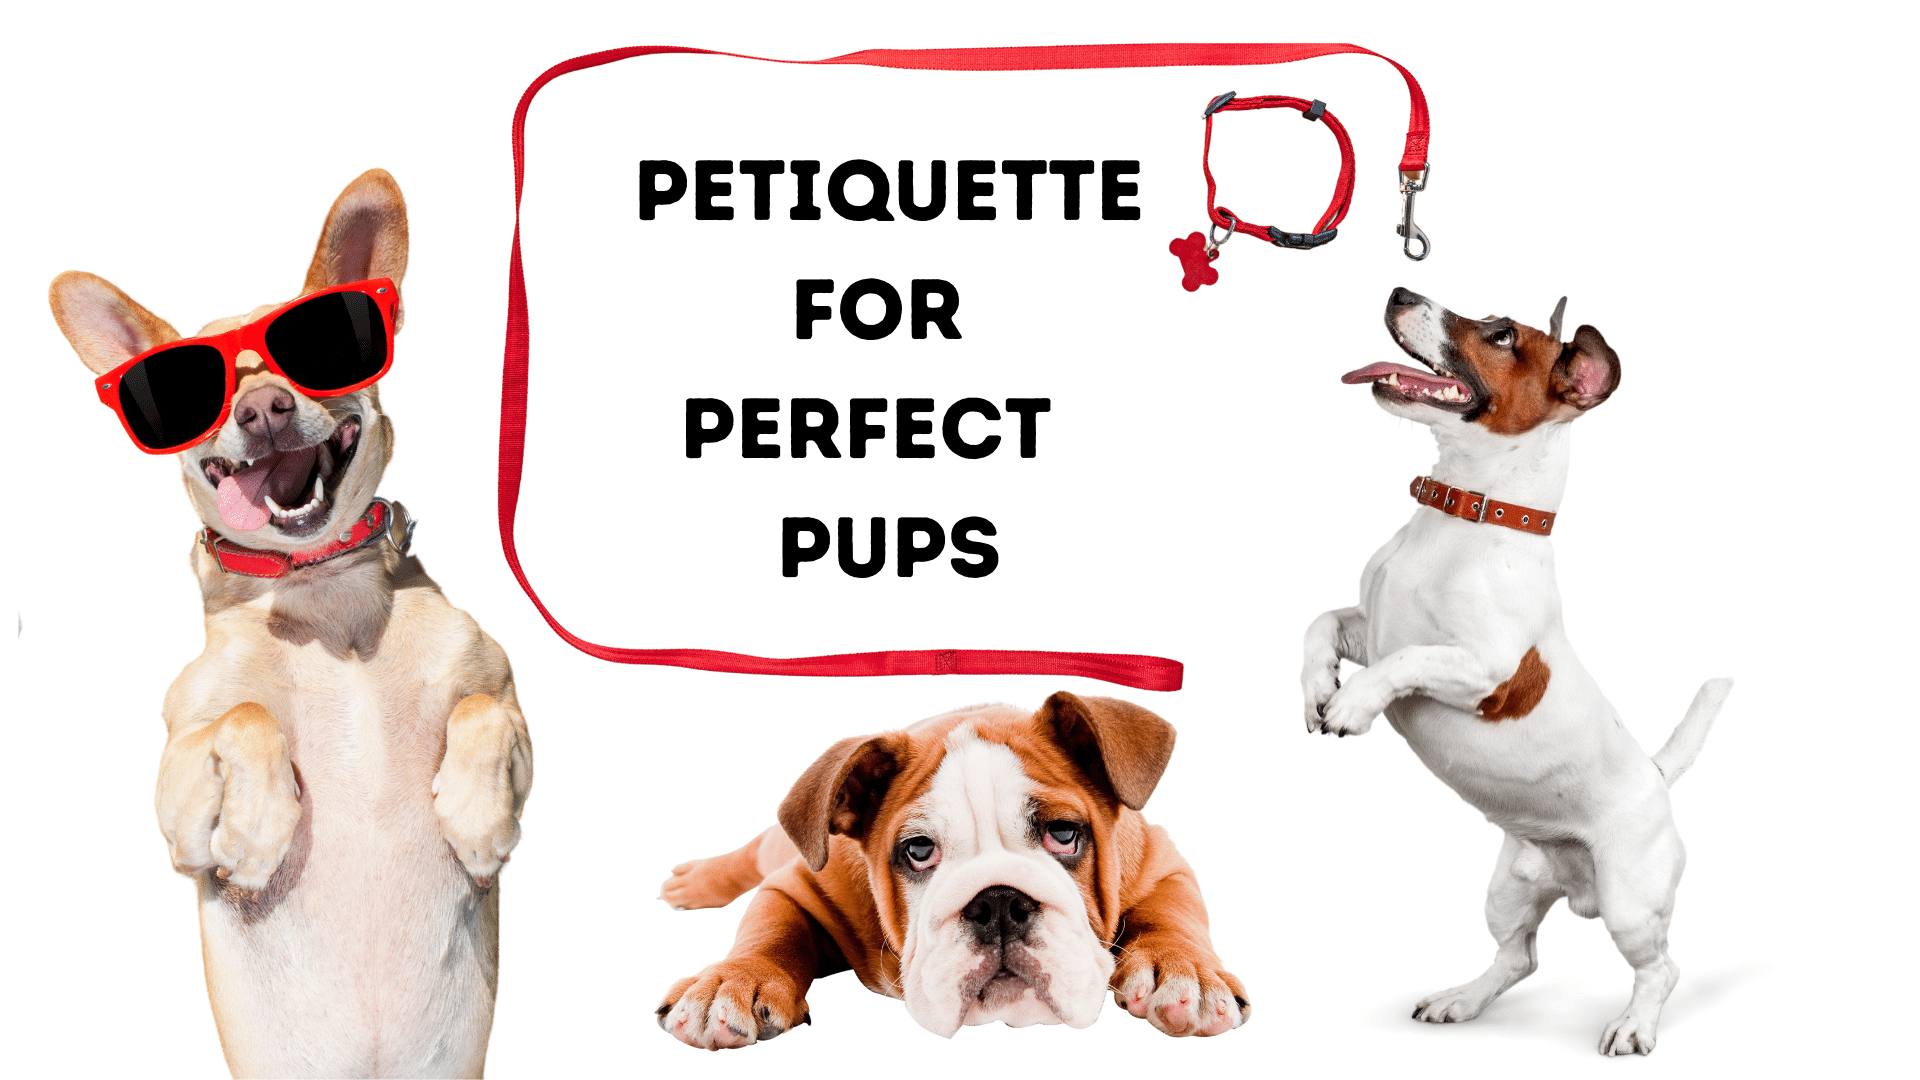 Petiquette for Perfect Pups